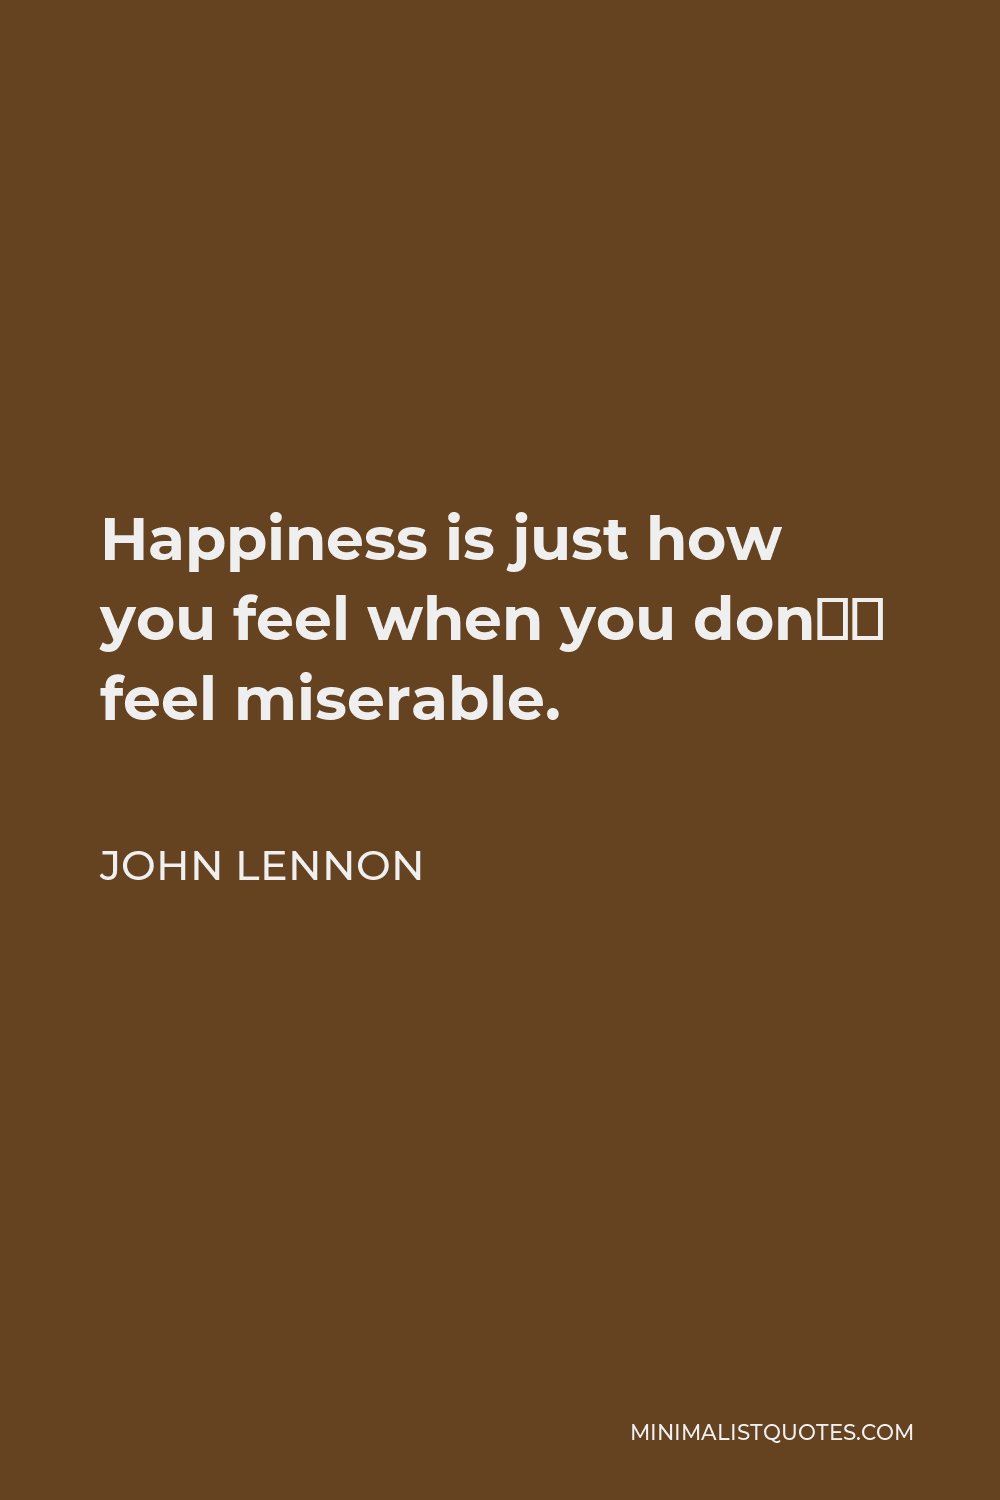 John Lennon Quote - Happiness is just how you feel when you don’t feel miserable.